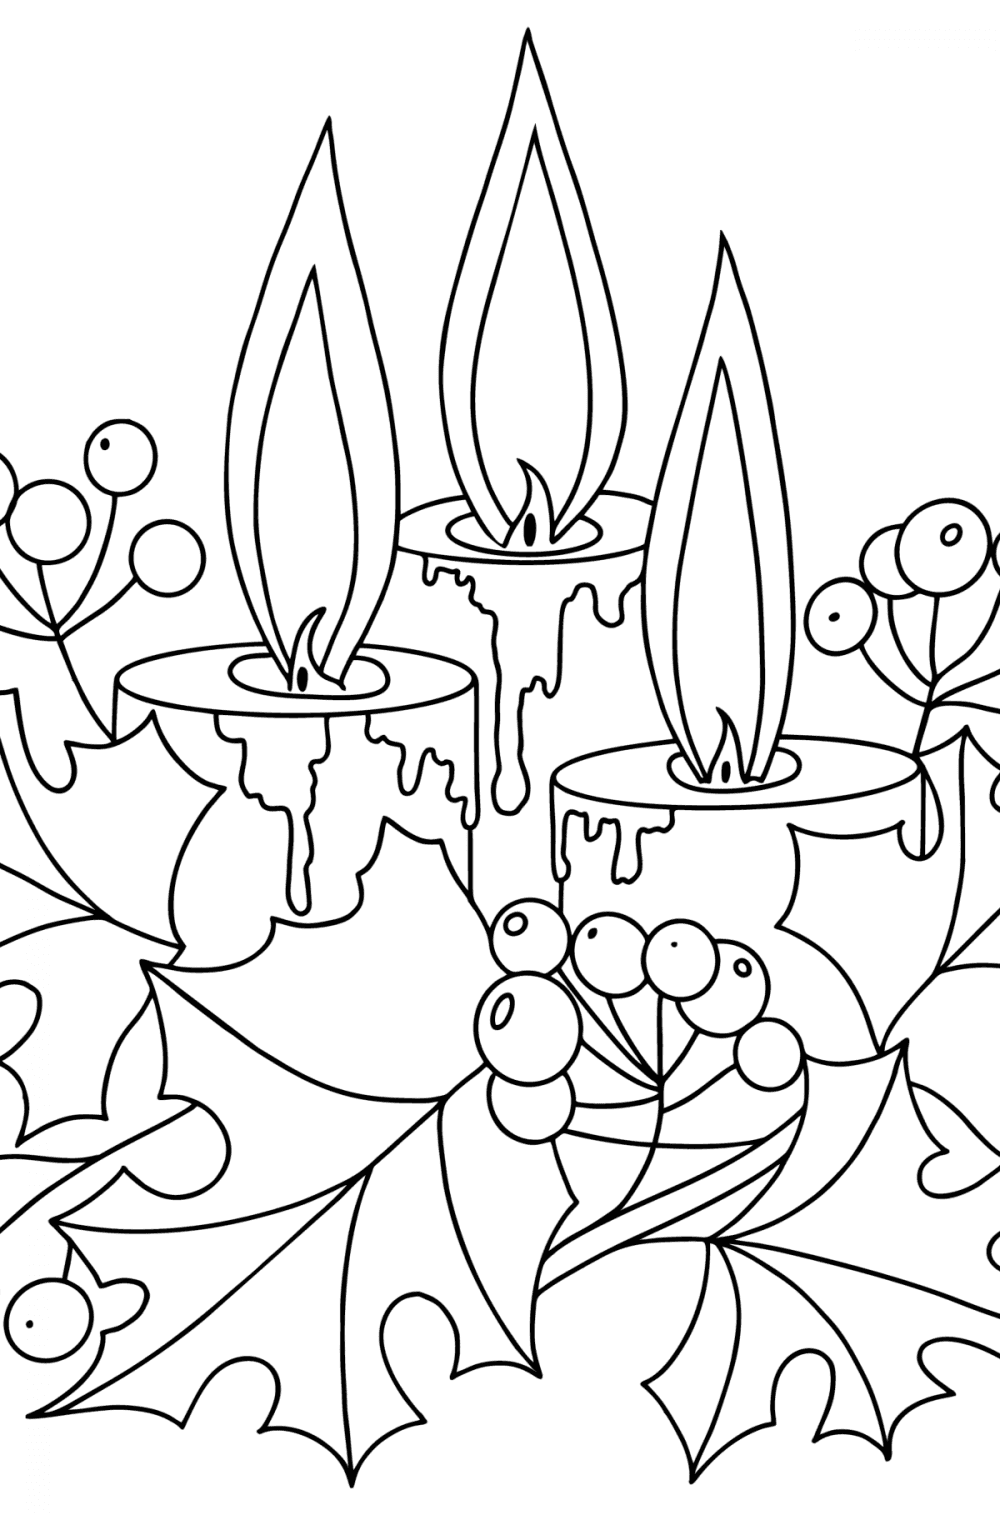 Christmas coloring pages for Adults - Online or Printable